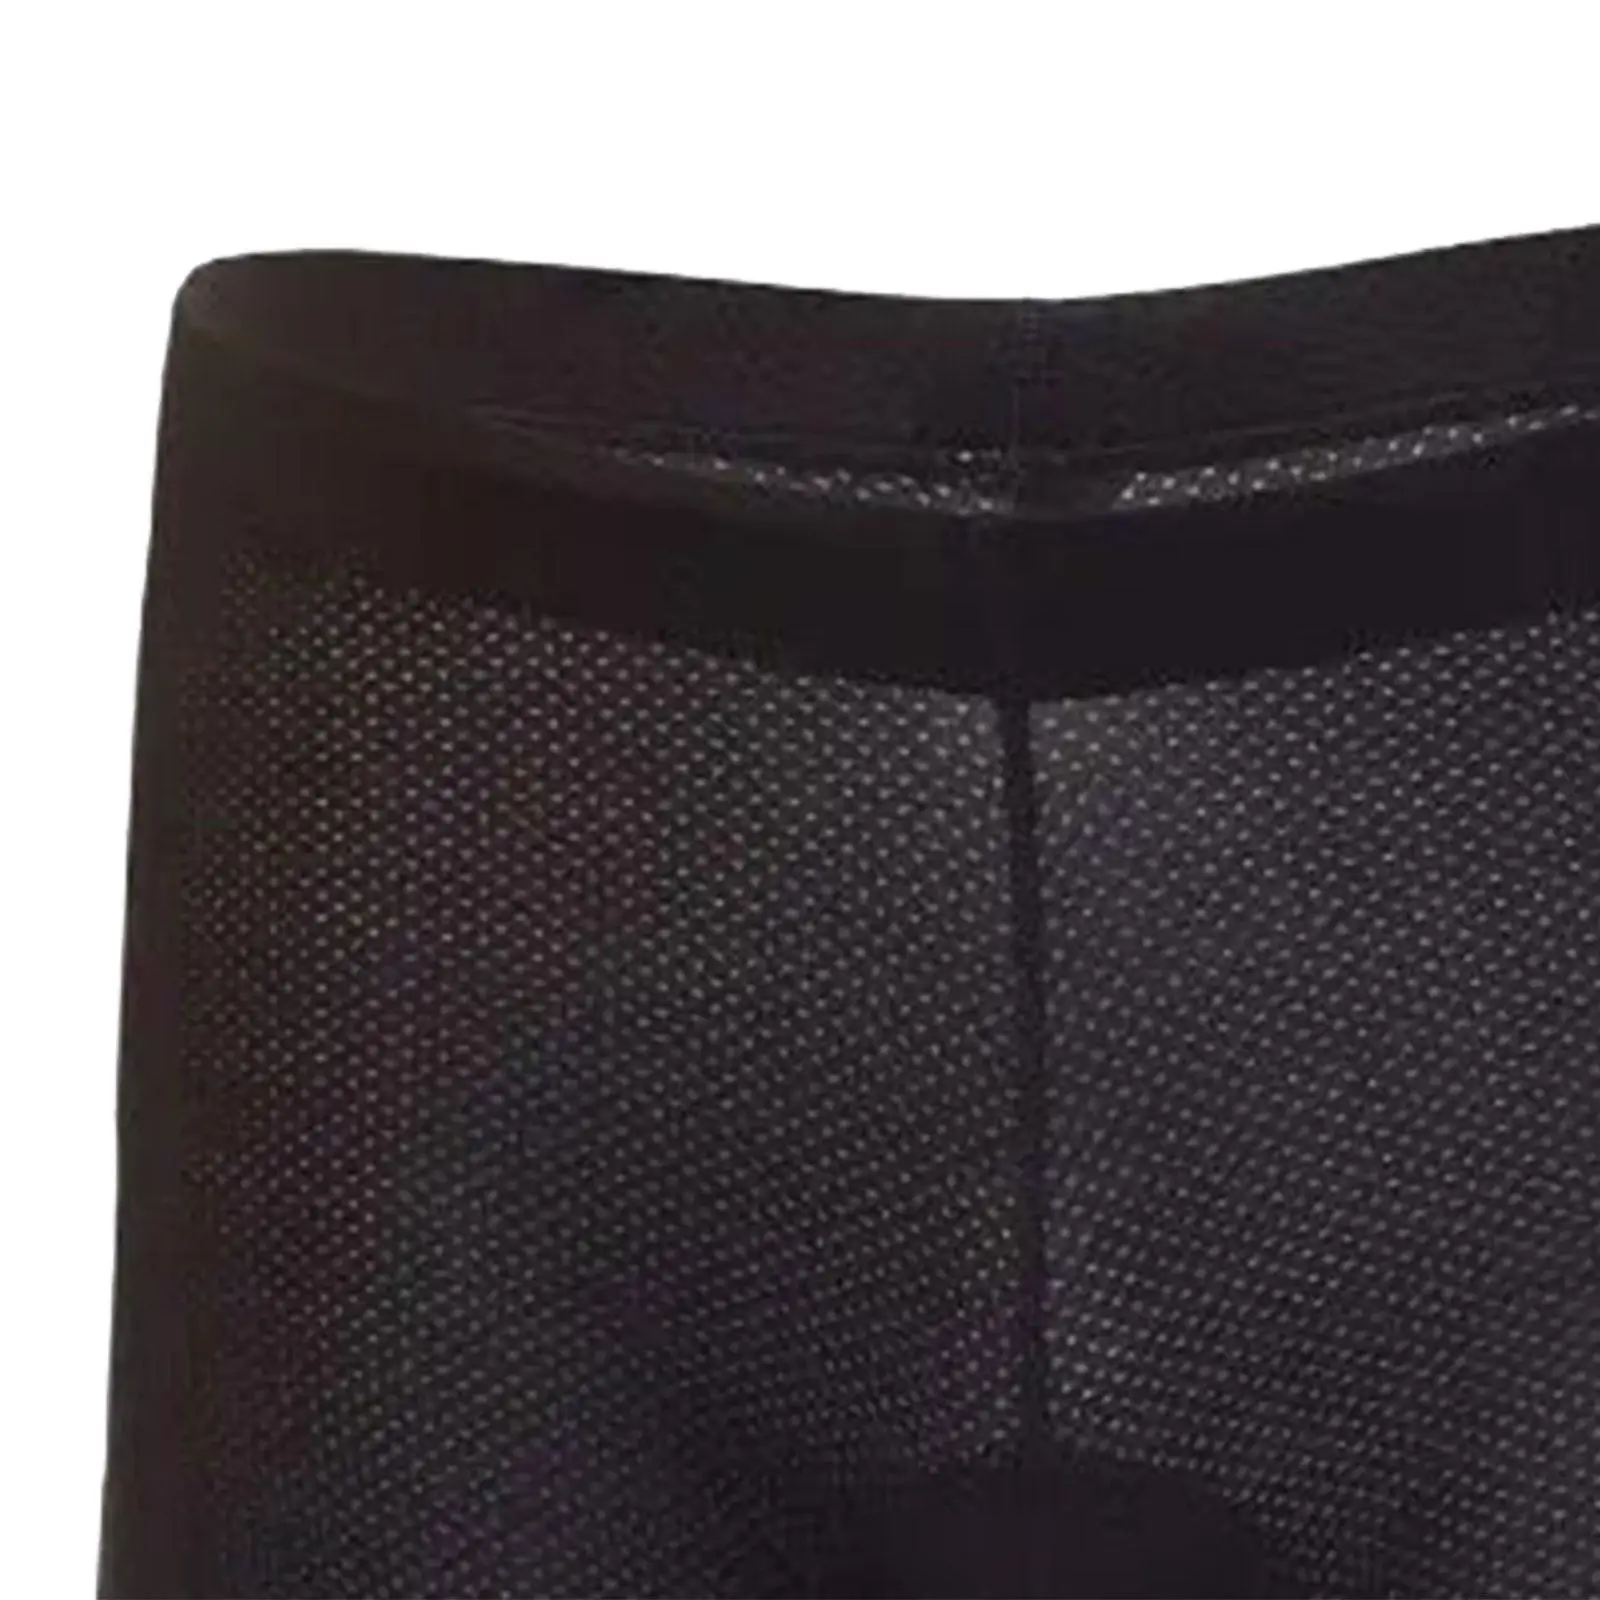 Bike Shorts with Padding Lightweight Shock Adsorbent Smooth Cycling Shorts